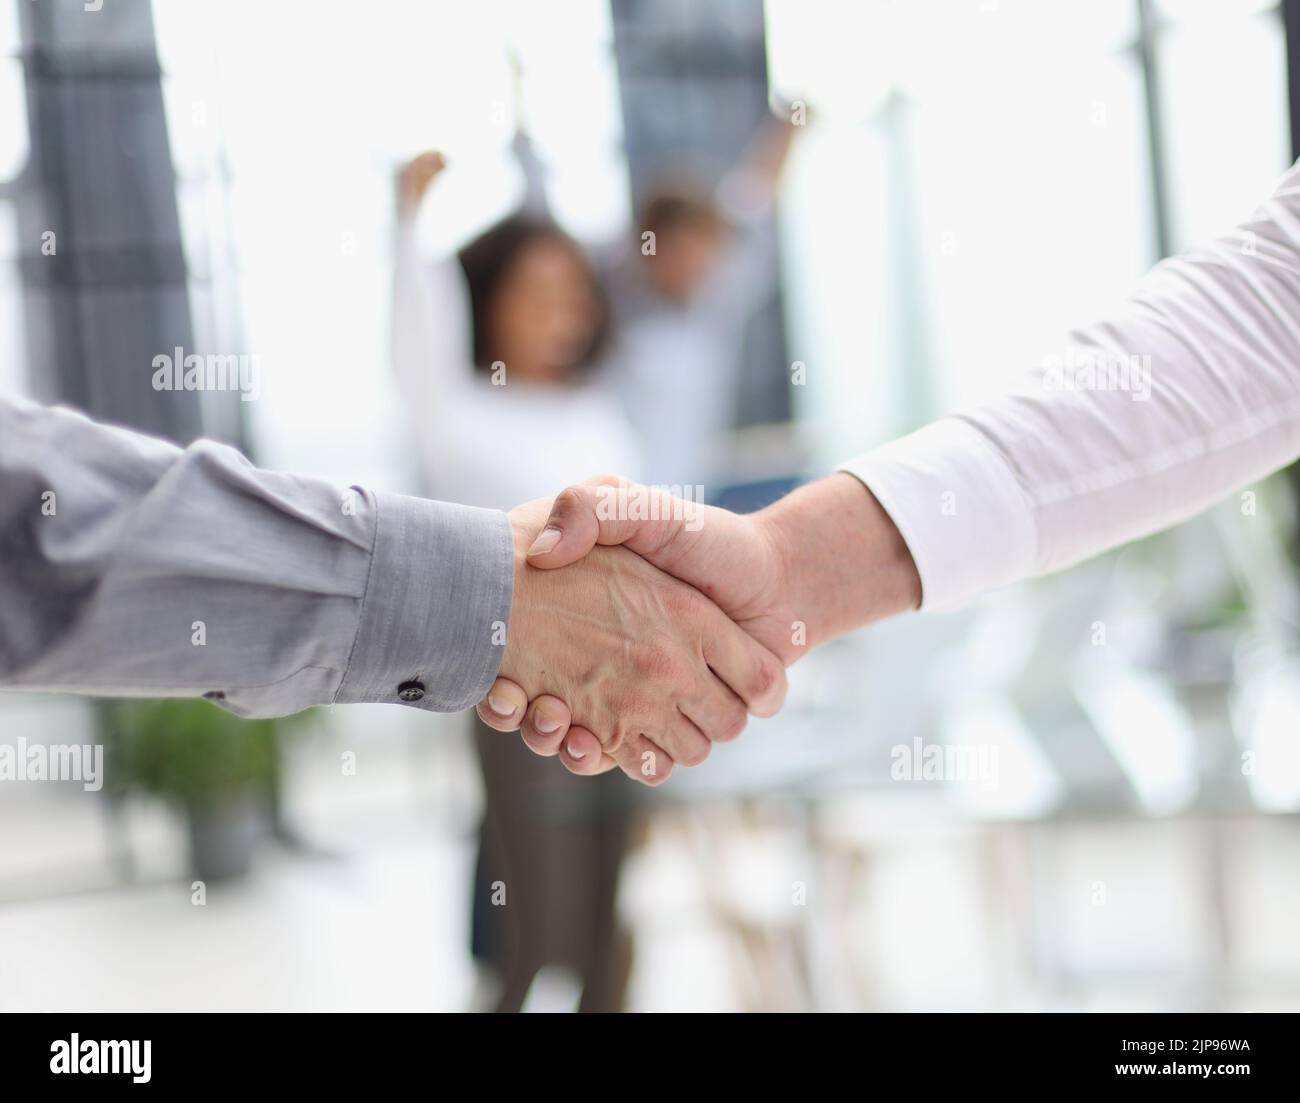 Close up people shaking hands on blurred background Stock Photo